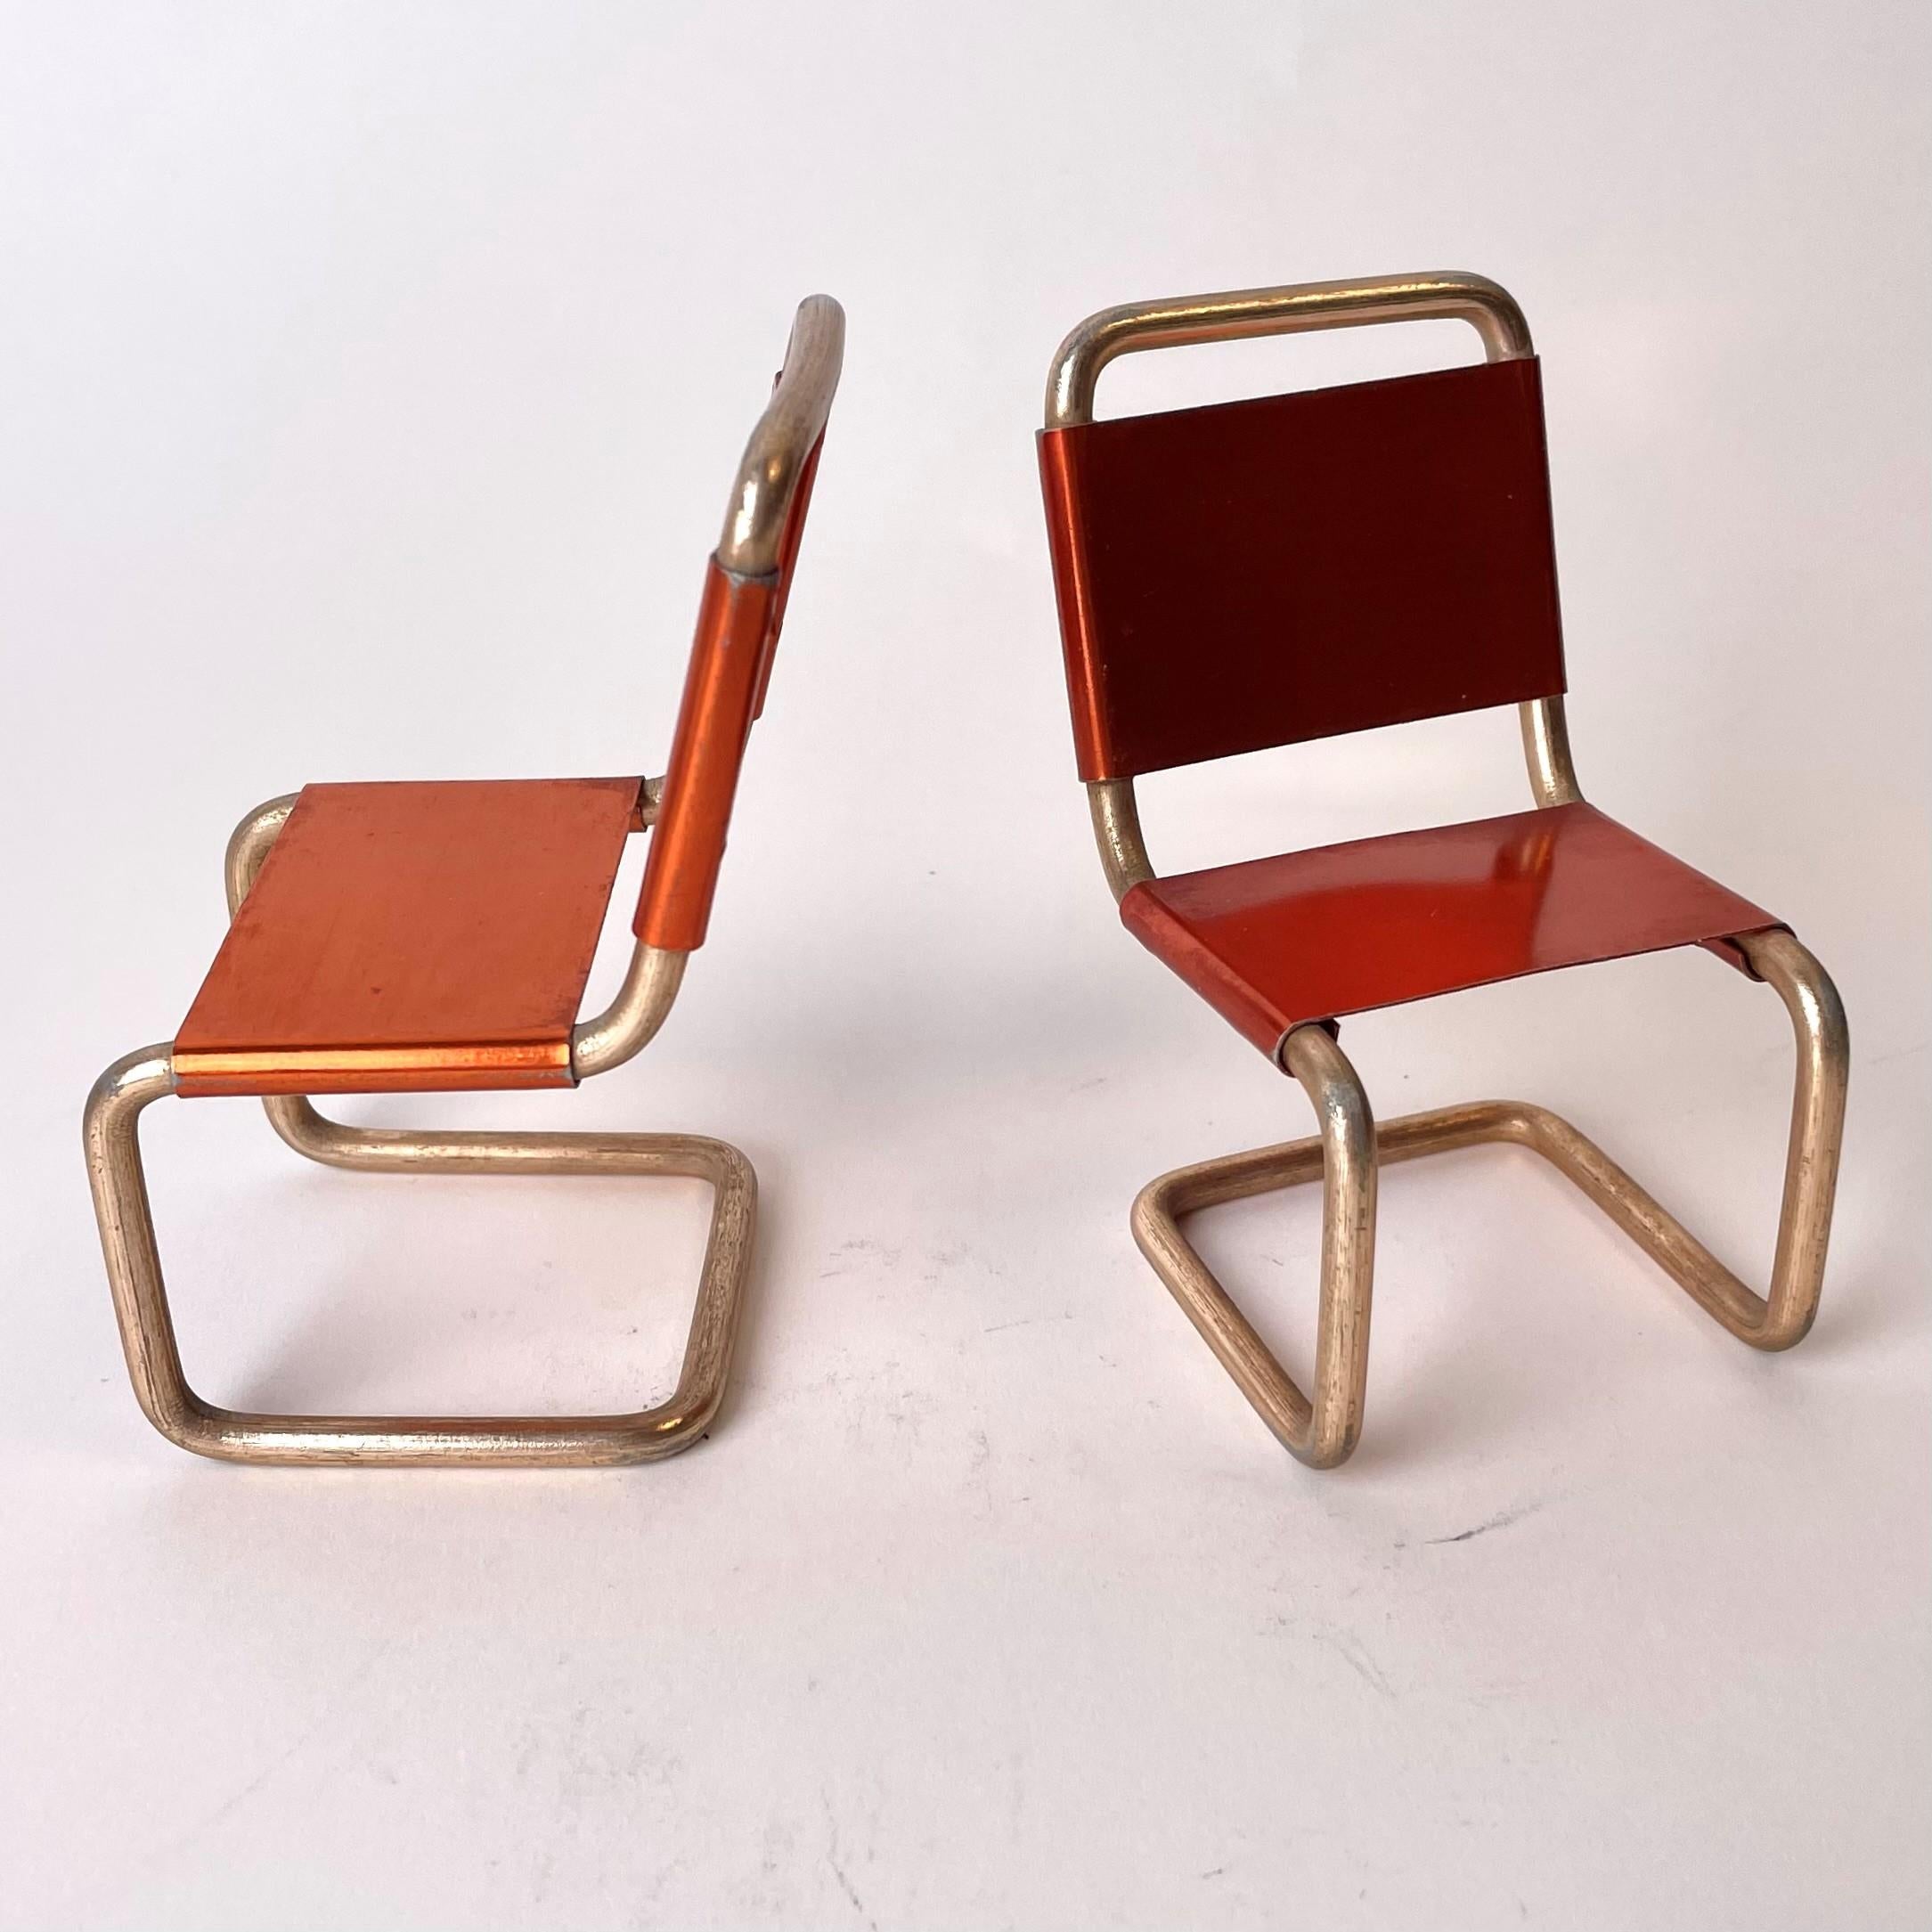 Mid-20th Century Charming Miniature Seating Group in Bauhaus Style from the 1930s-1940s For Sale